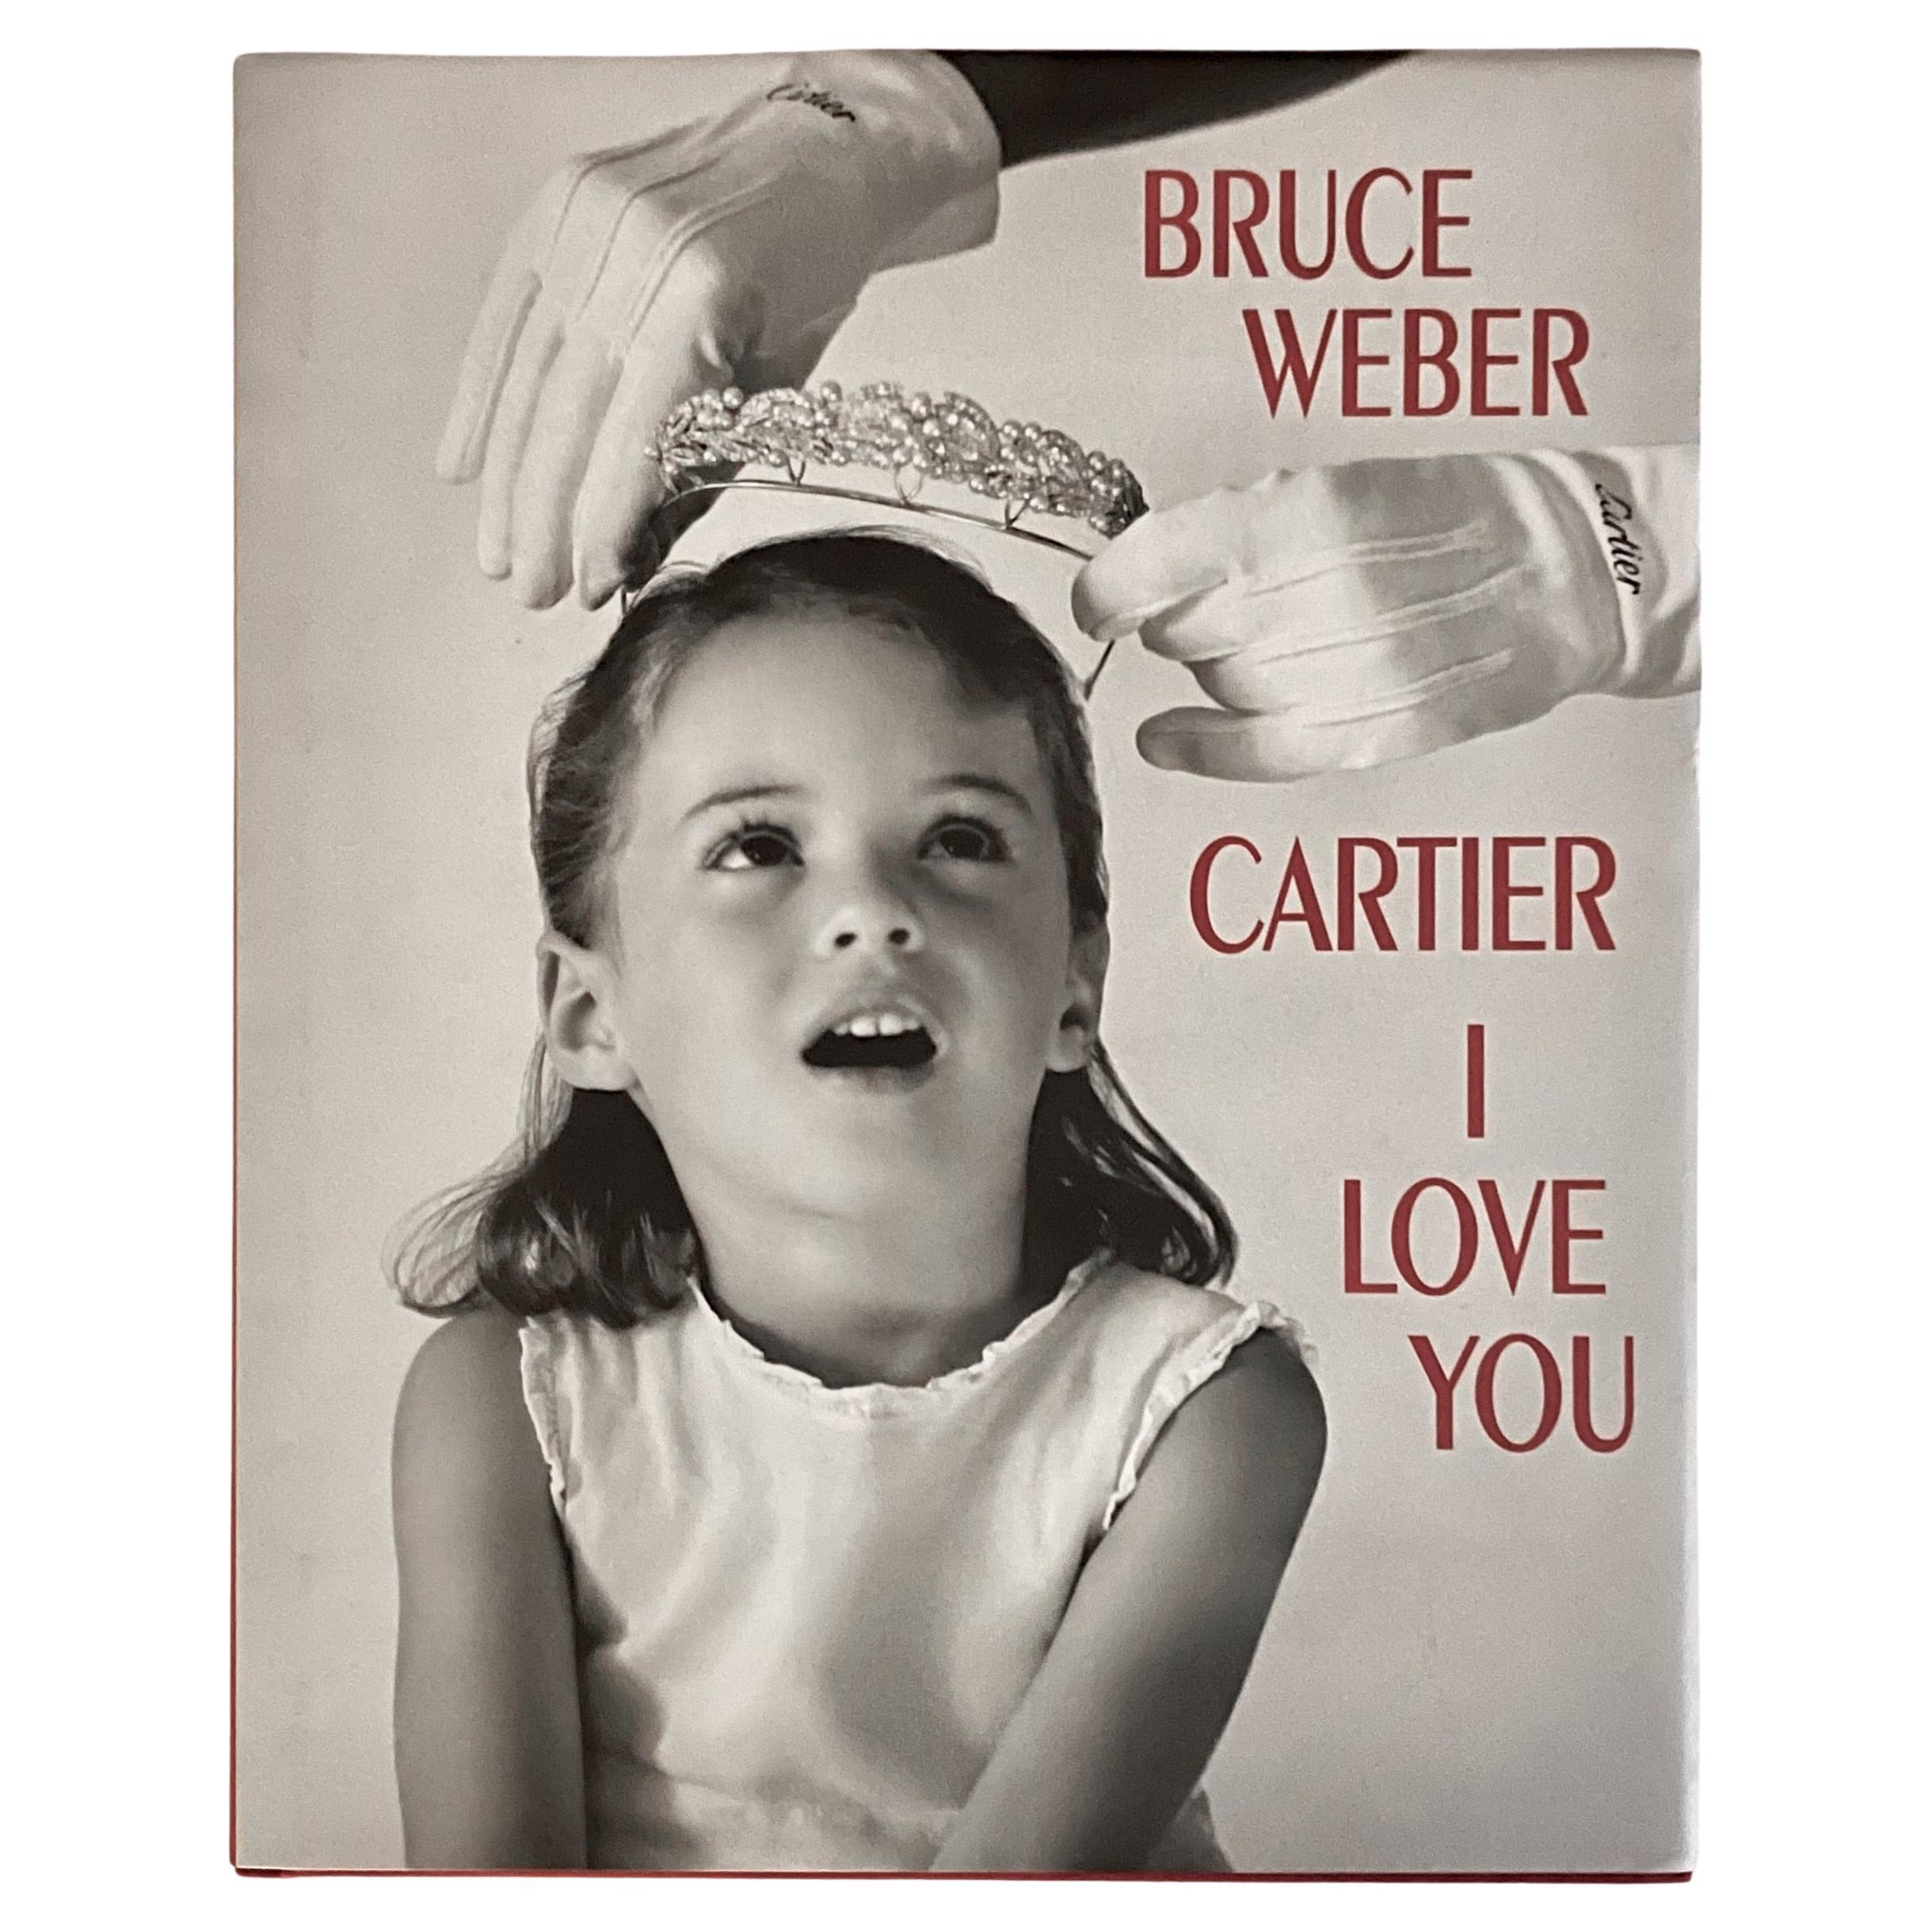 Cartier I Love You - Bruce Weber - 1st Edition, teNeues, Italy, 2009